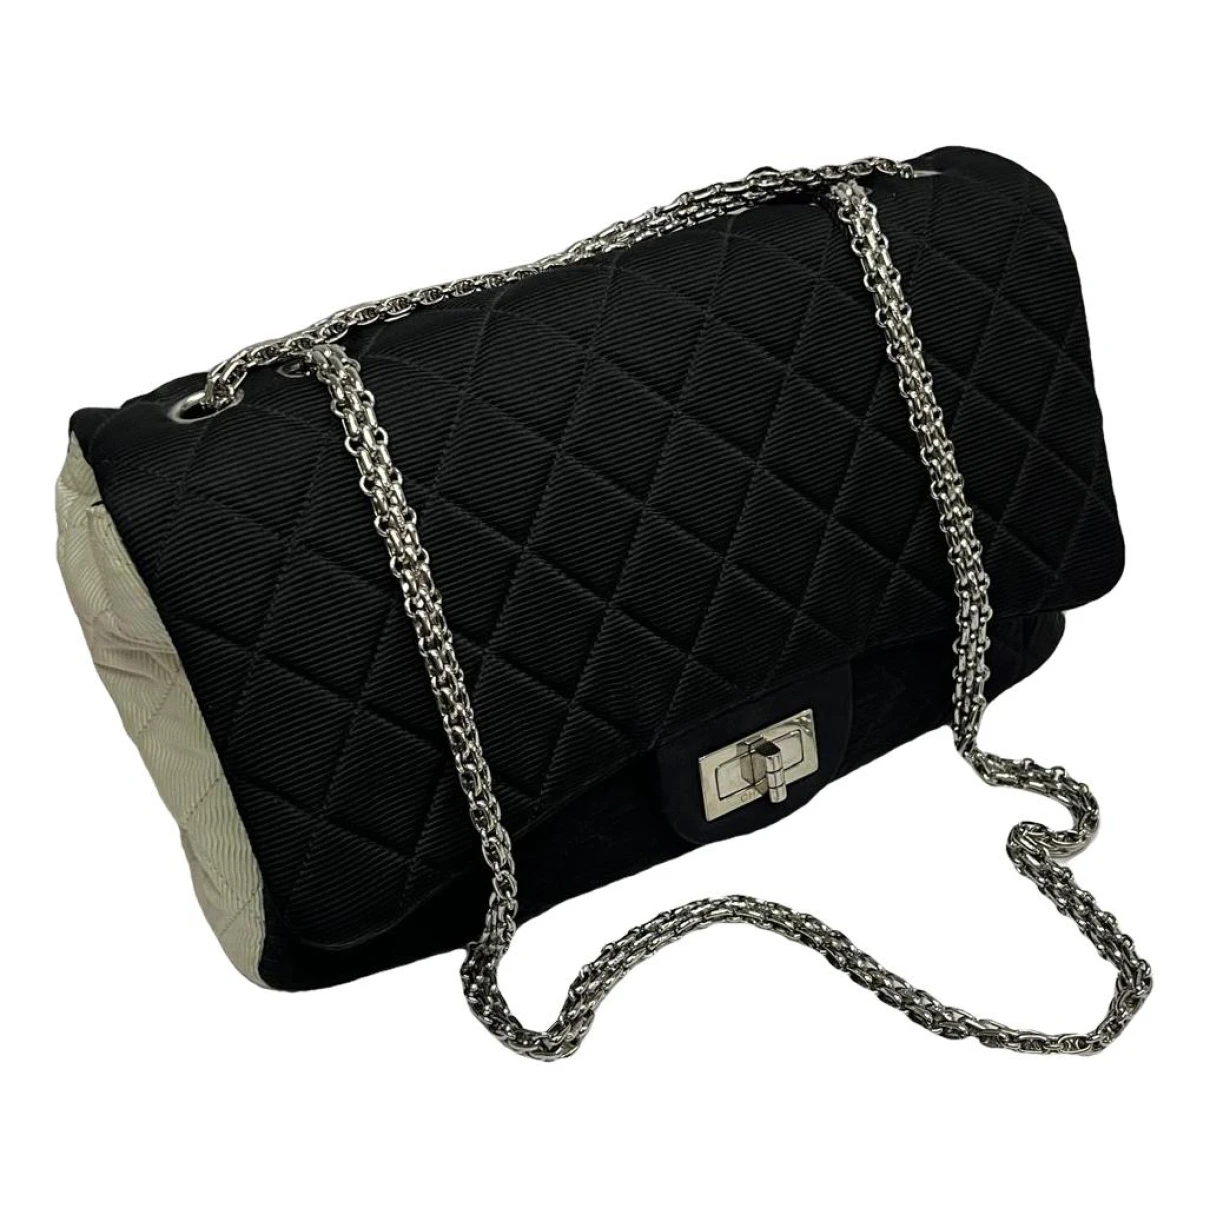 Pre-owned Chanel 2.55 Cloth Crossbody Bag In Black